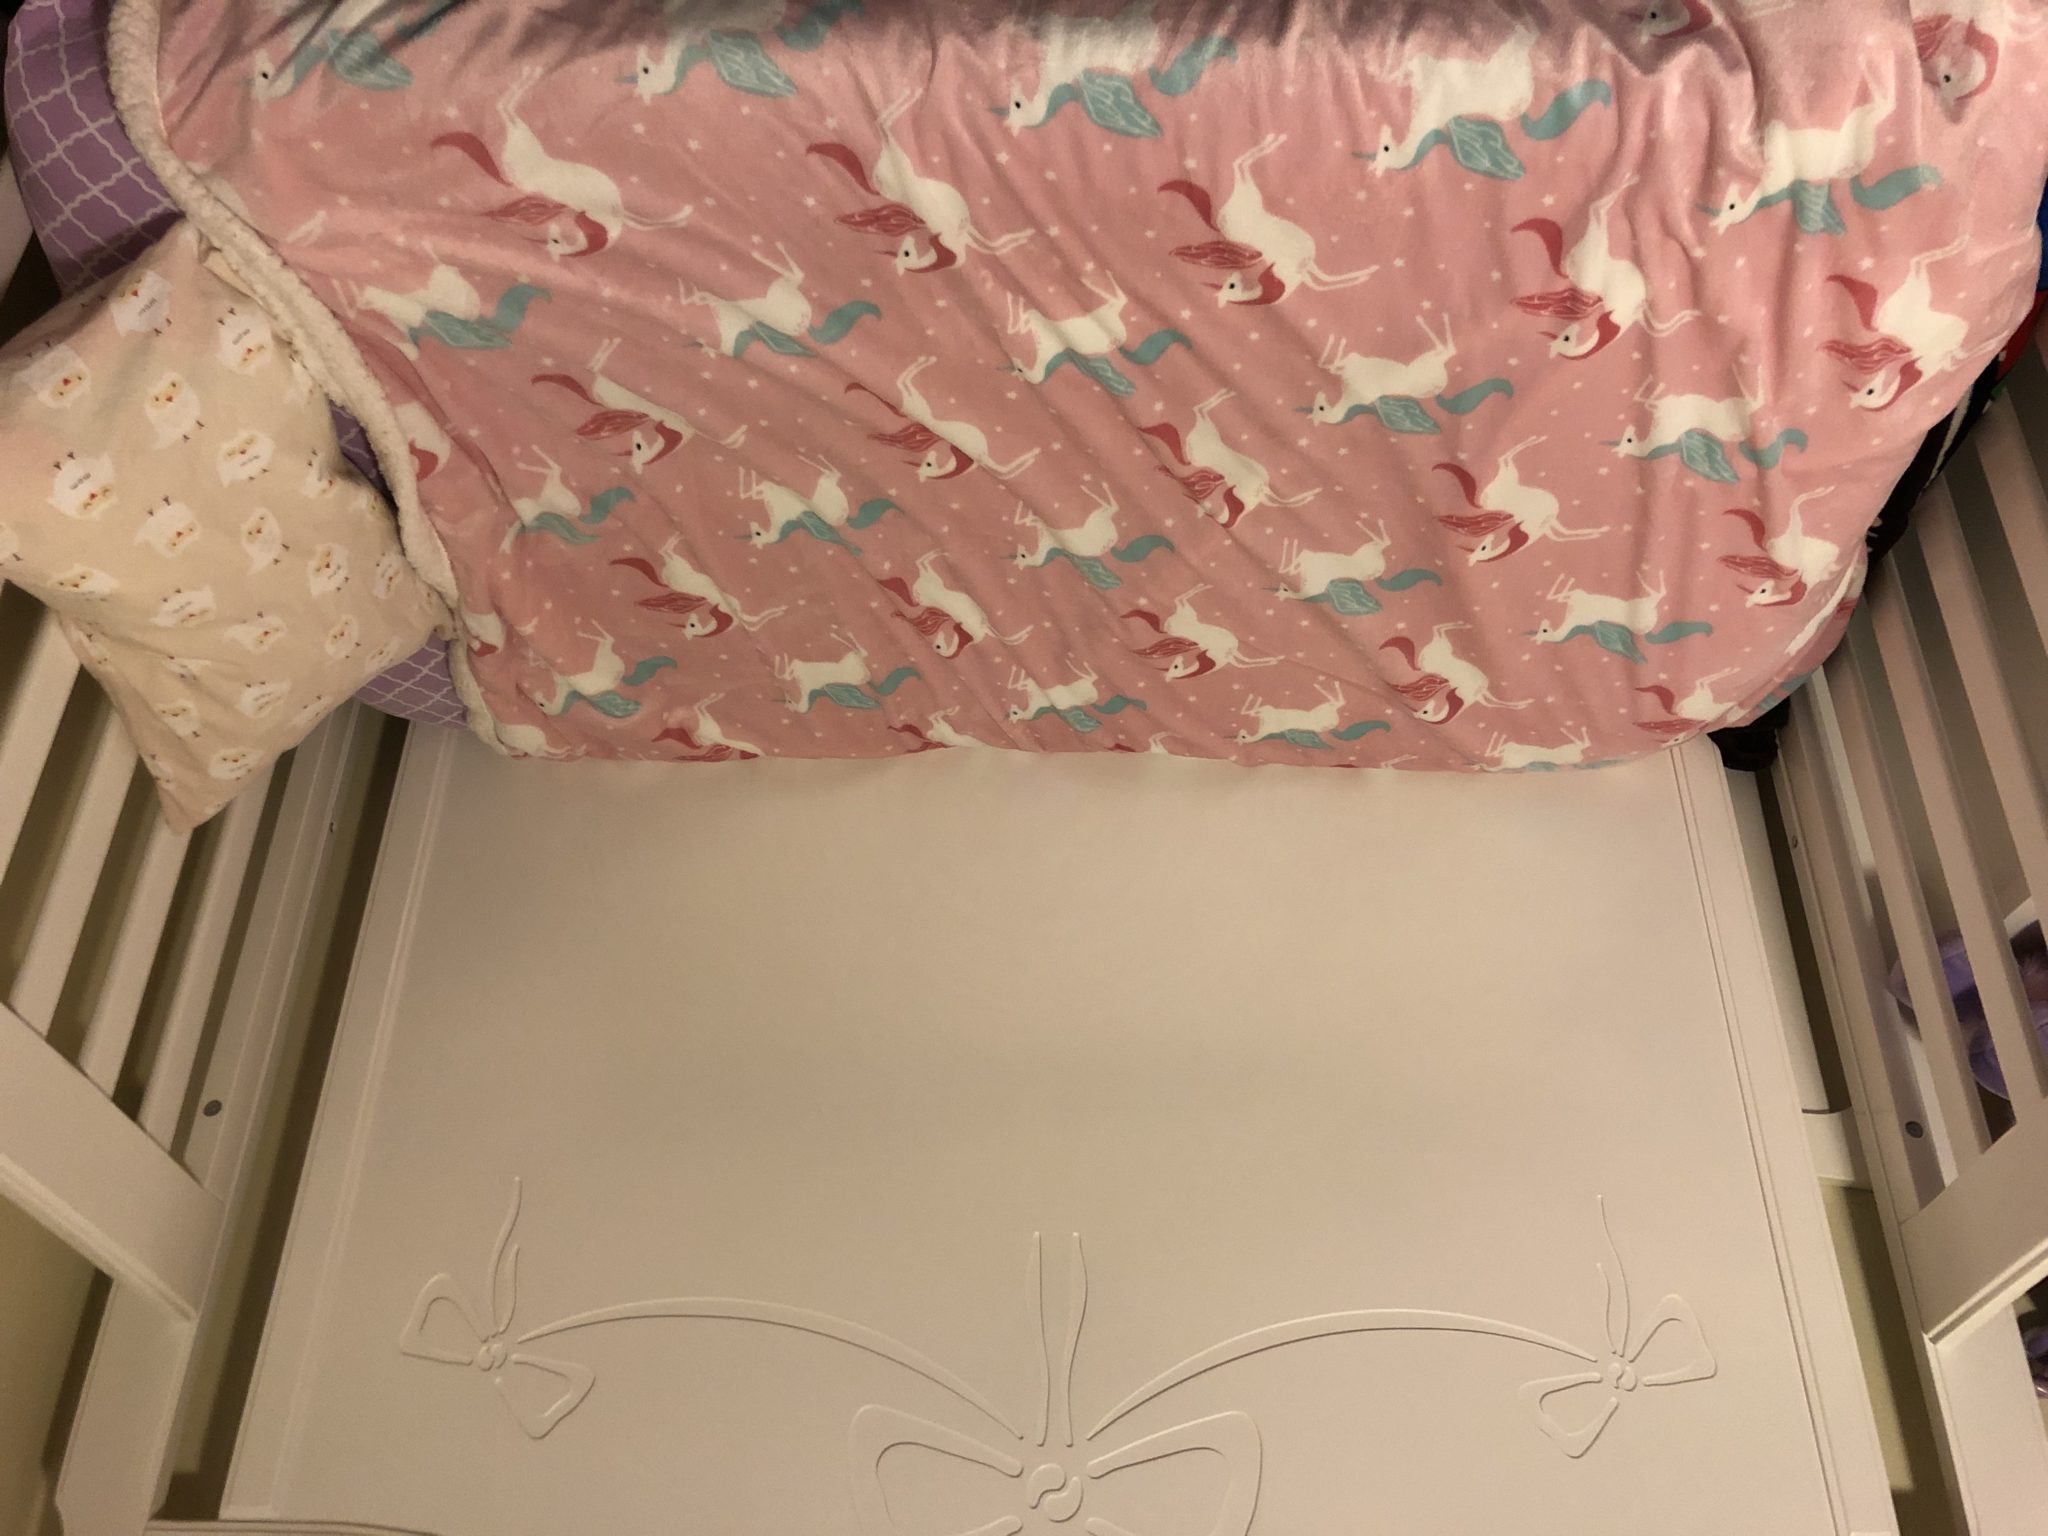 View of fully made toddler bed.